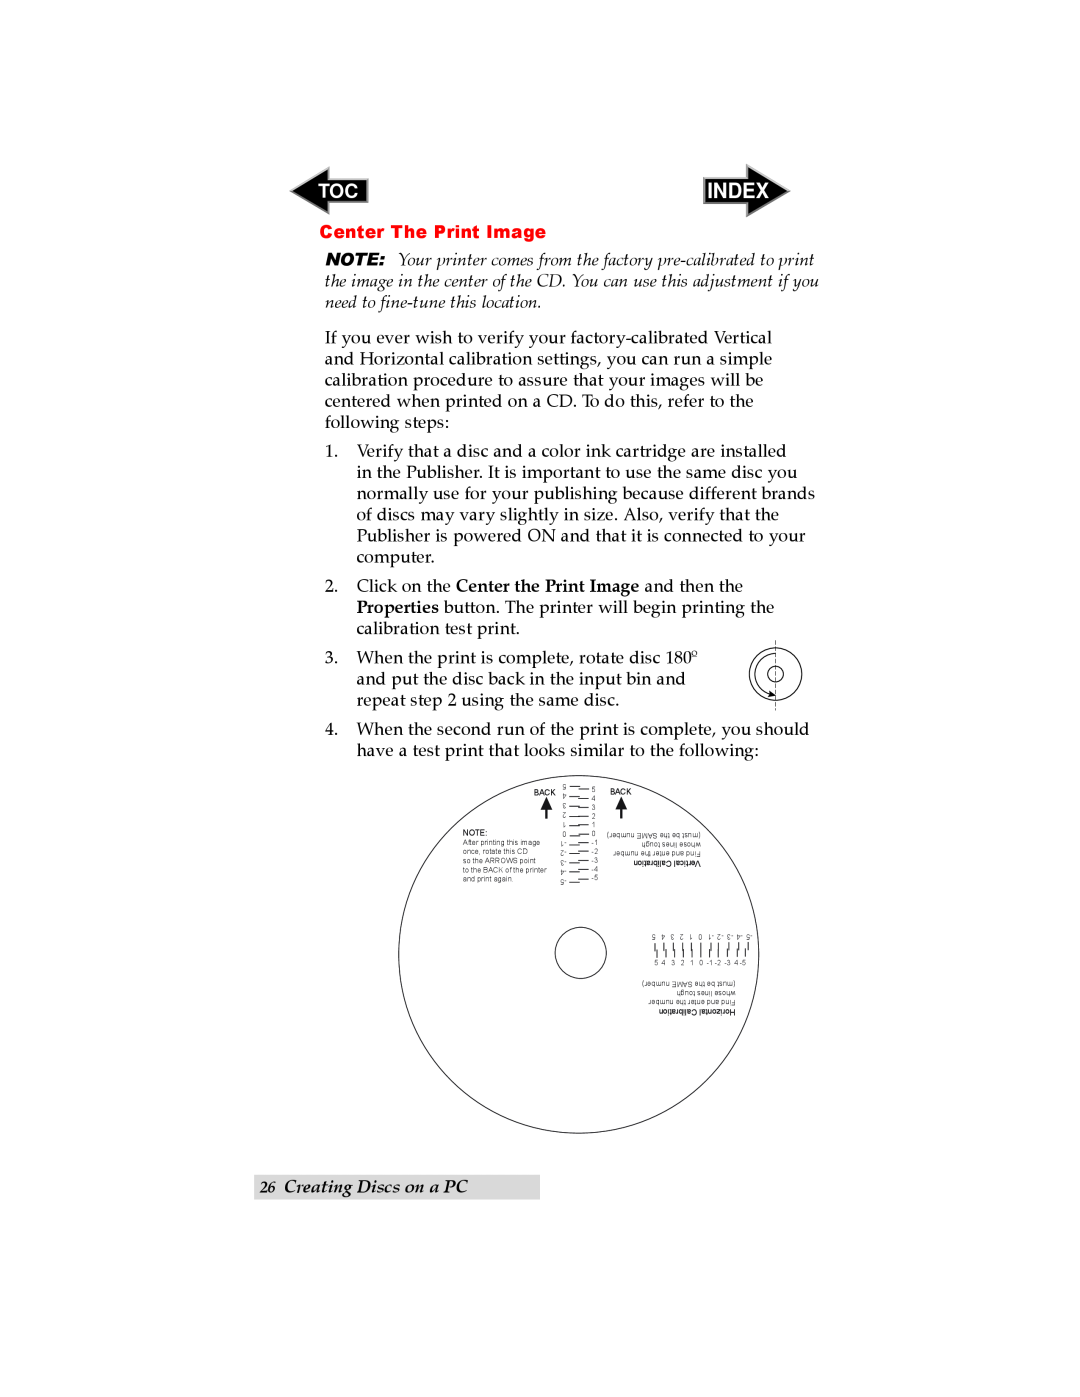 Primera Technology SE user manual Center The Print Image, Creating Discs on a PC, Index 